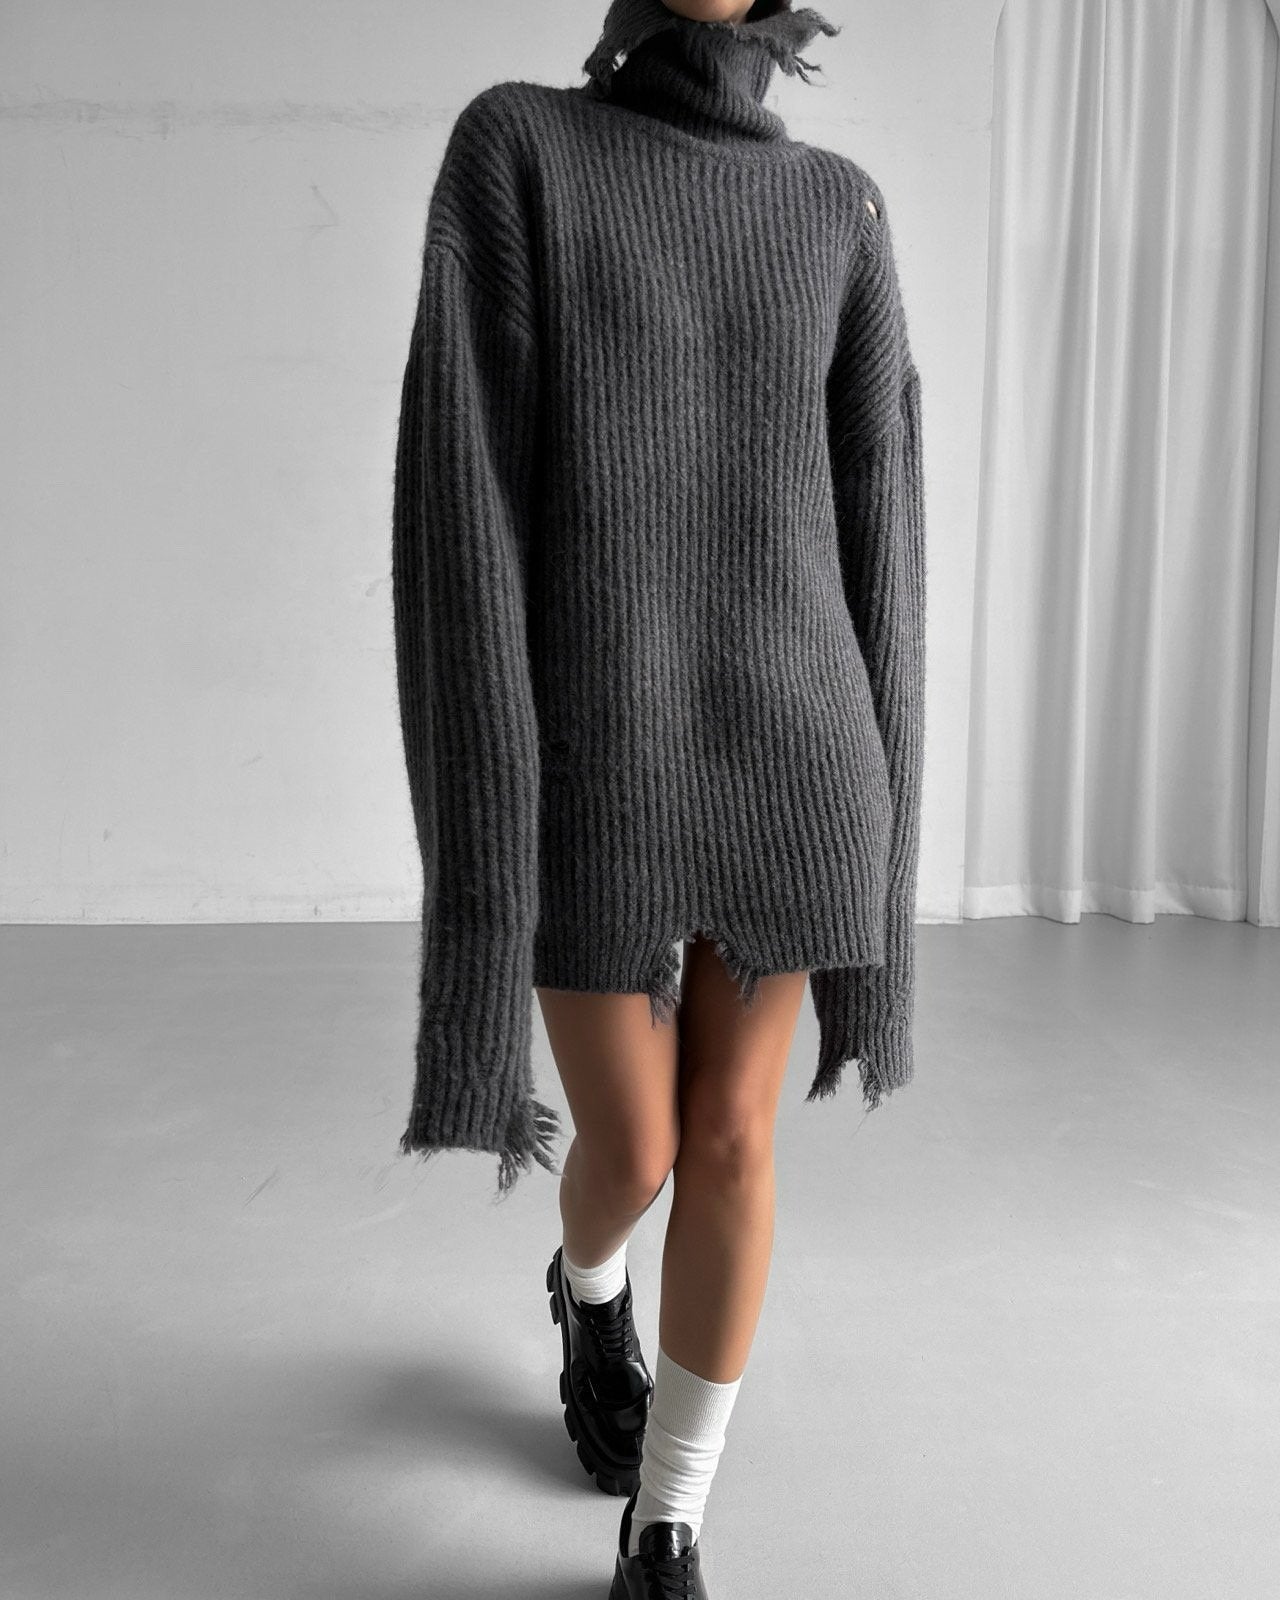 [Ready to ship] [PAPERMOON] AW / Alpaca Blend Wool Chunky Oversized Distressed Turtleneck Knit